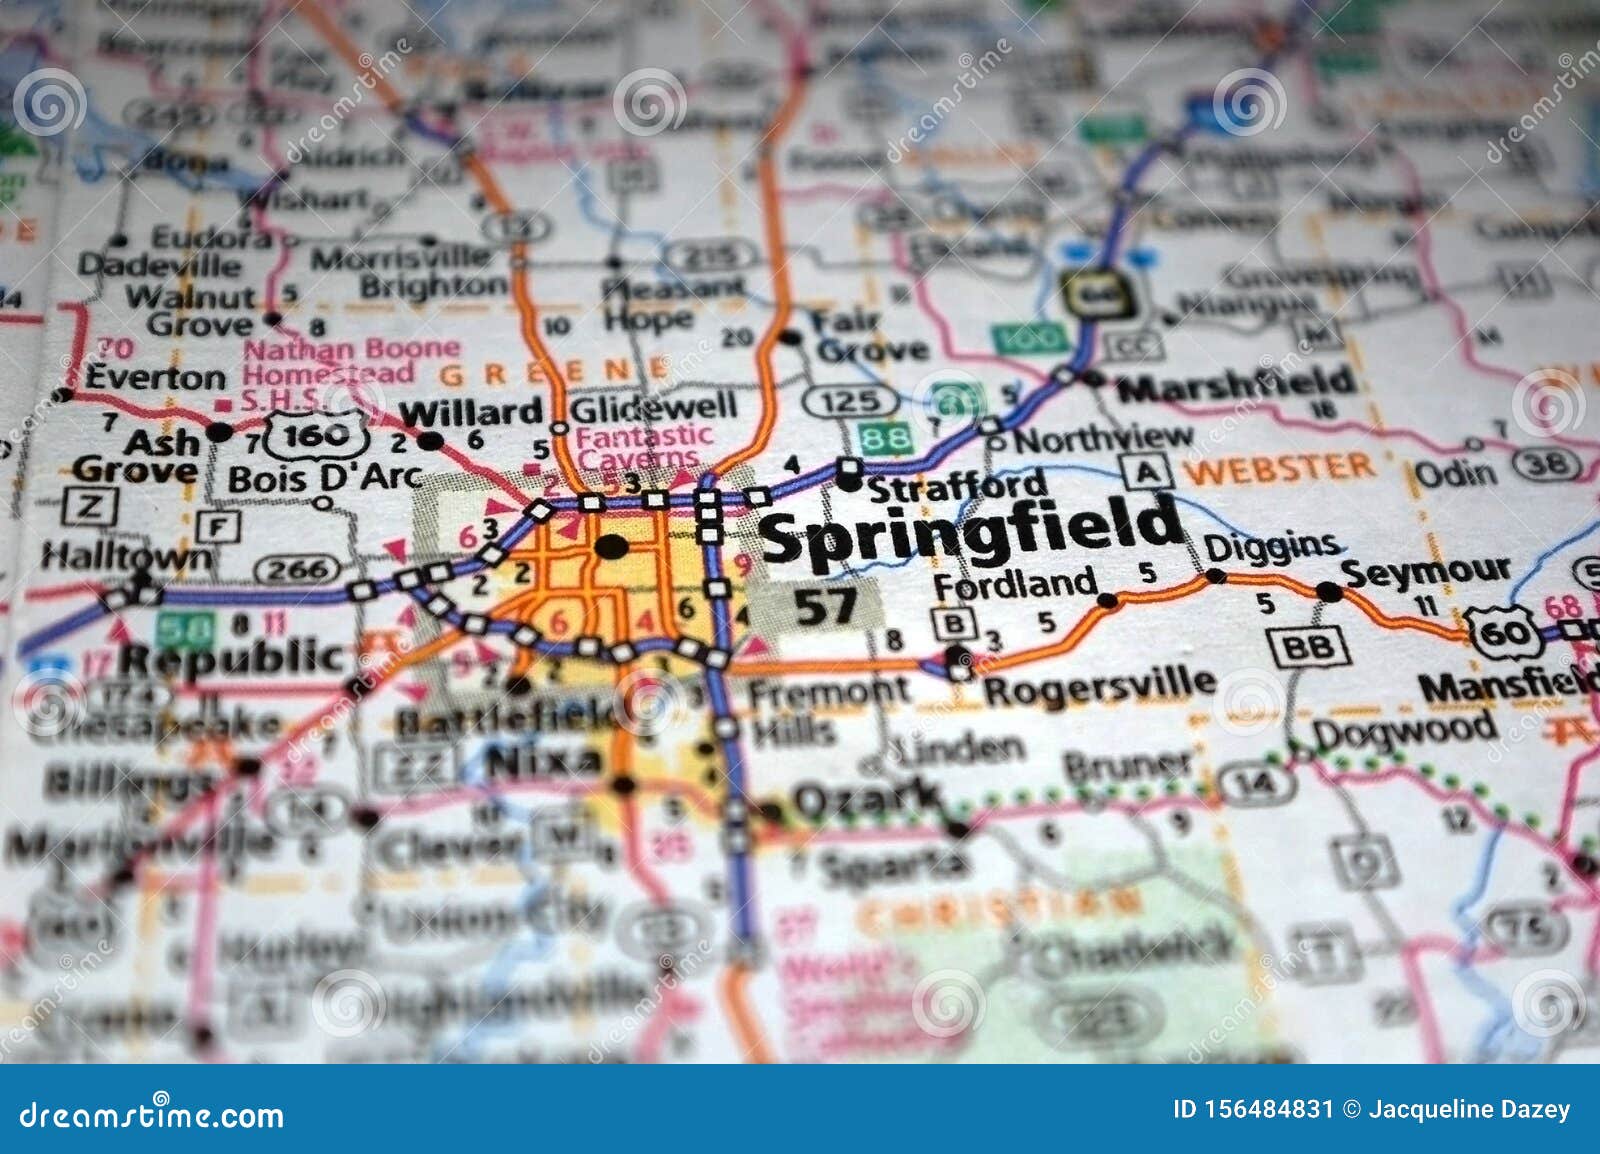 extreme close-up of springfield, missouri in a map